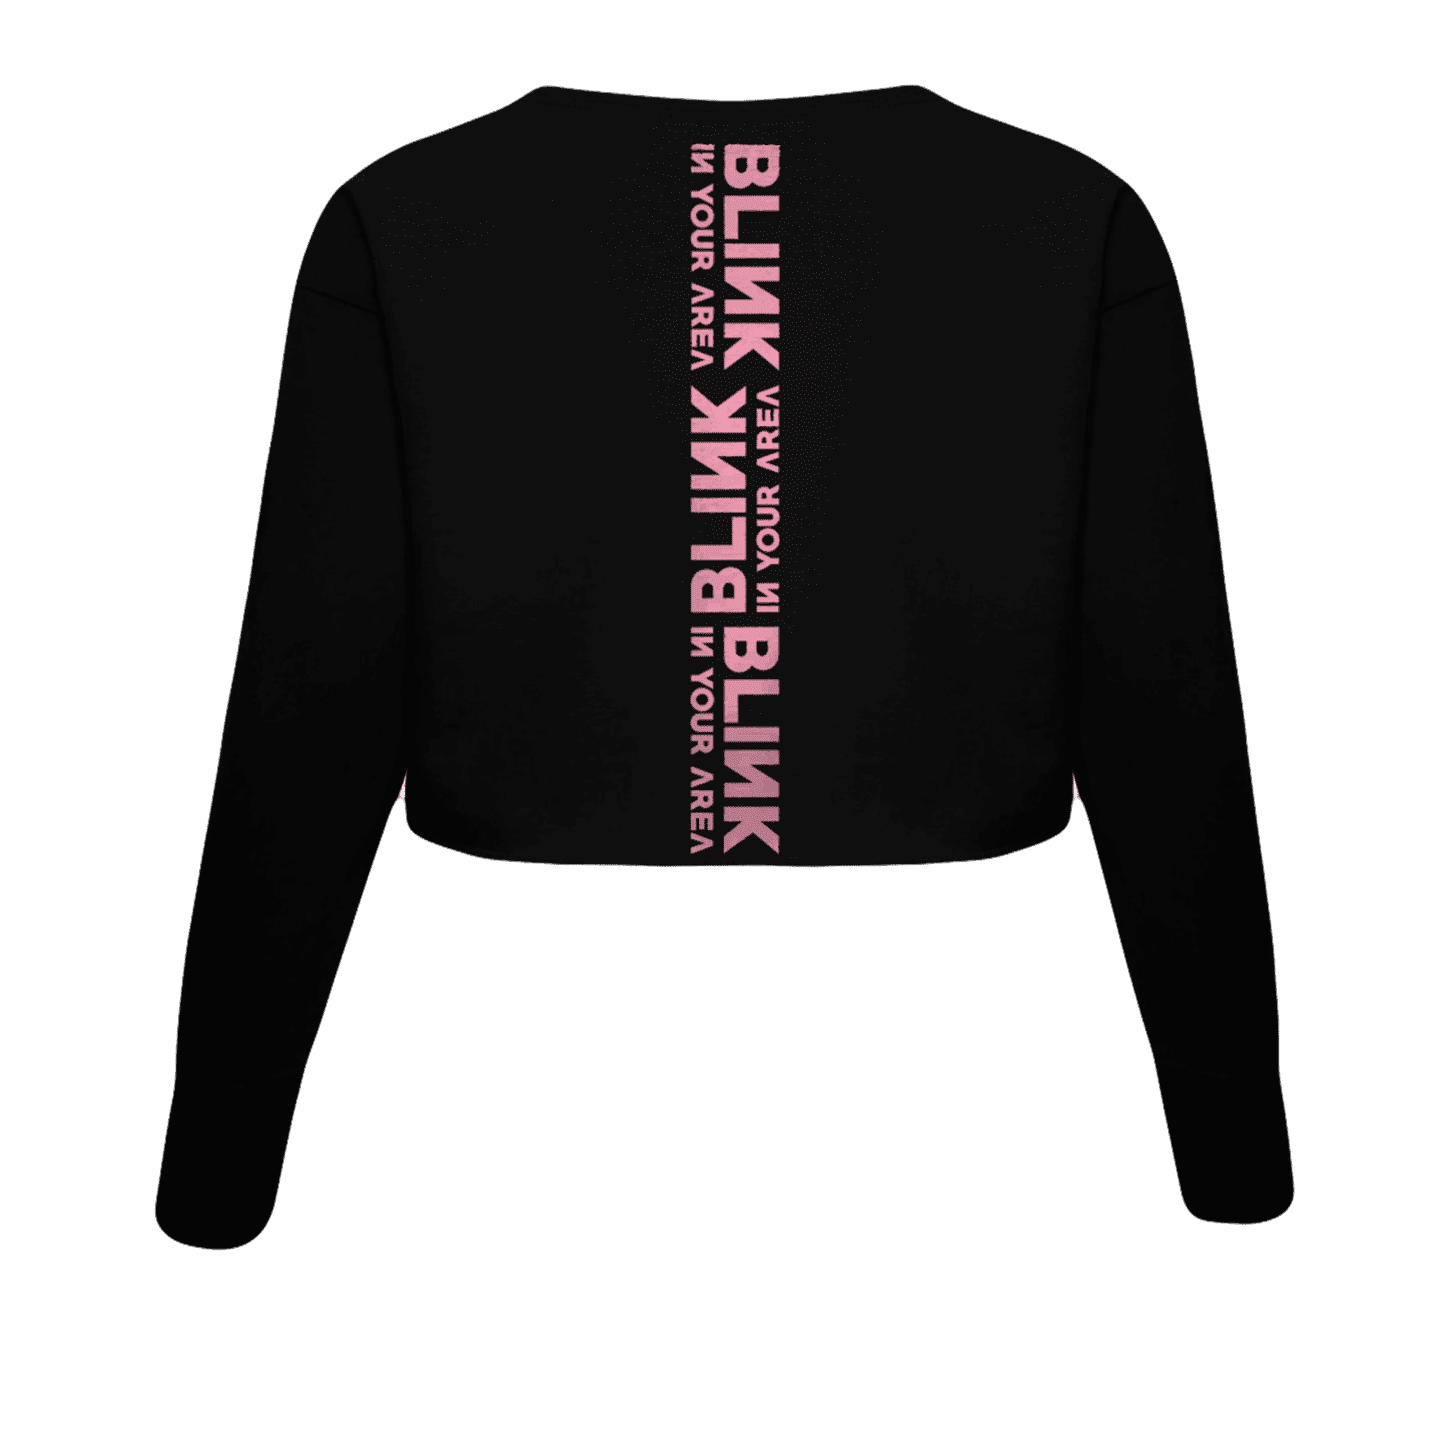 BLINK IN YOUR AREA Cropped Sweater, Black/Pink